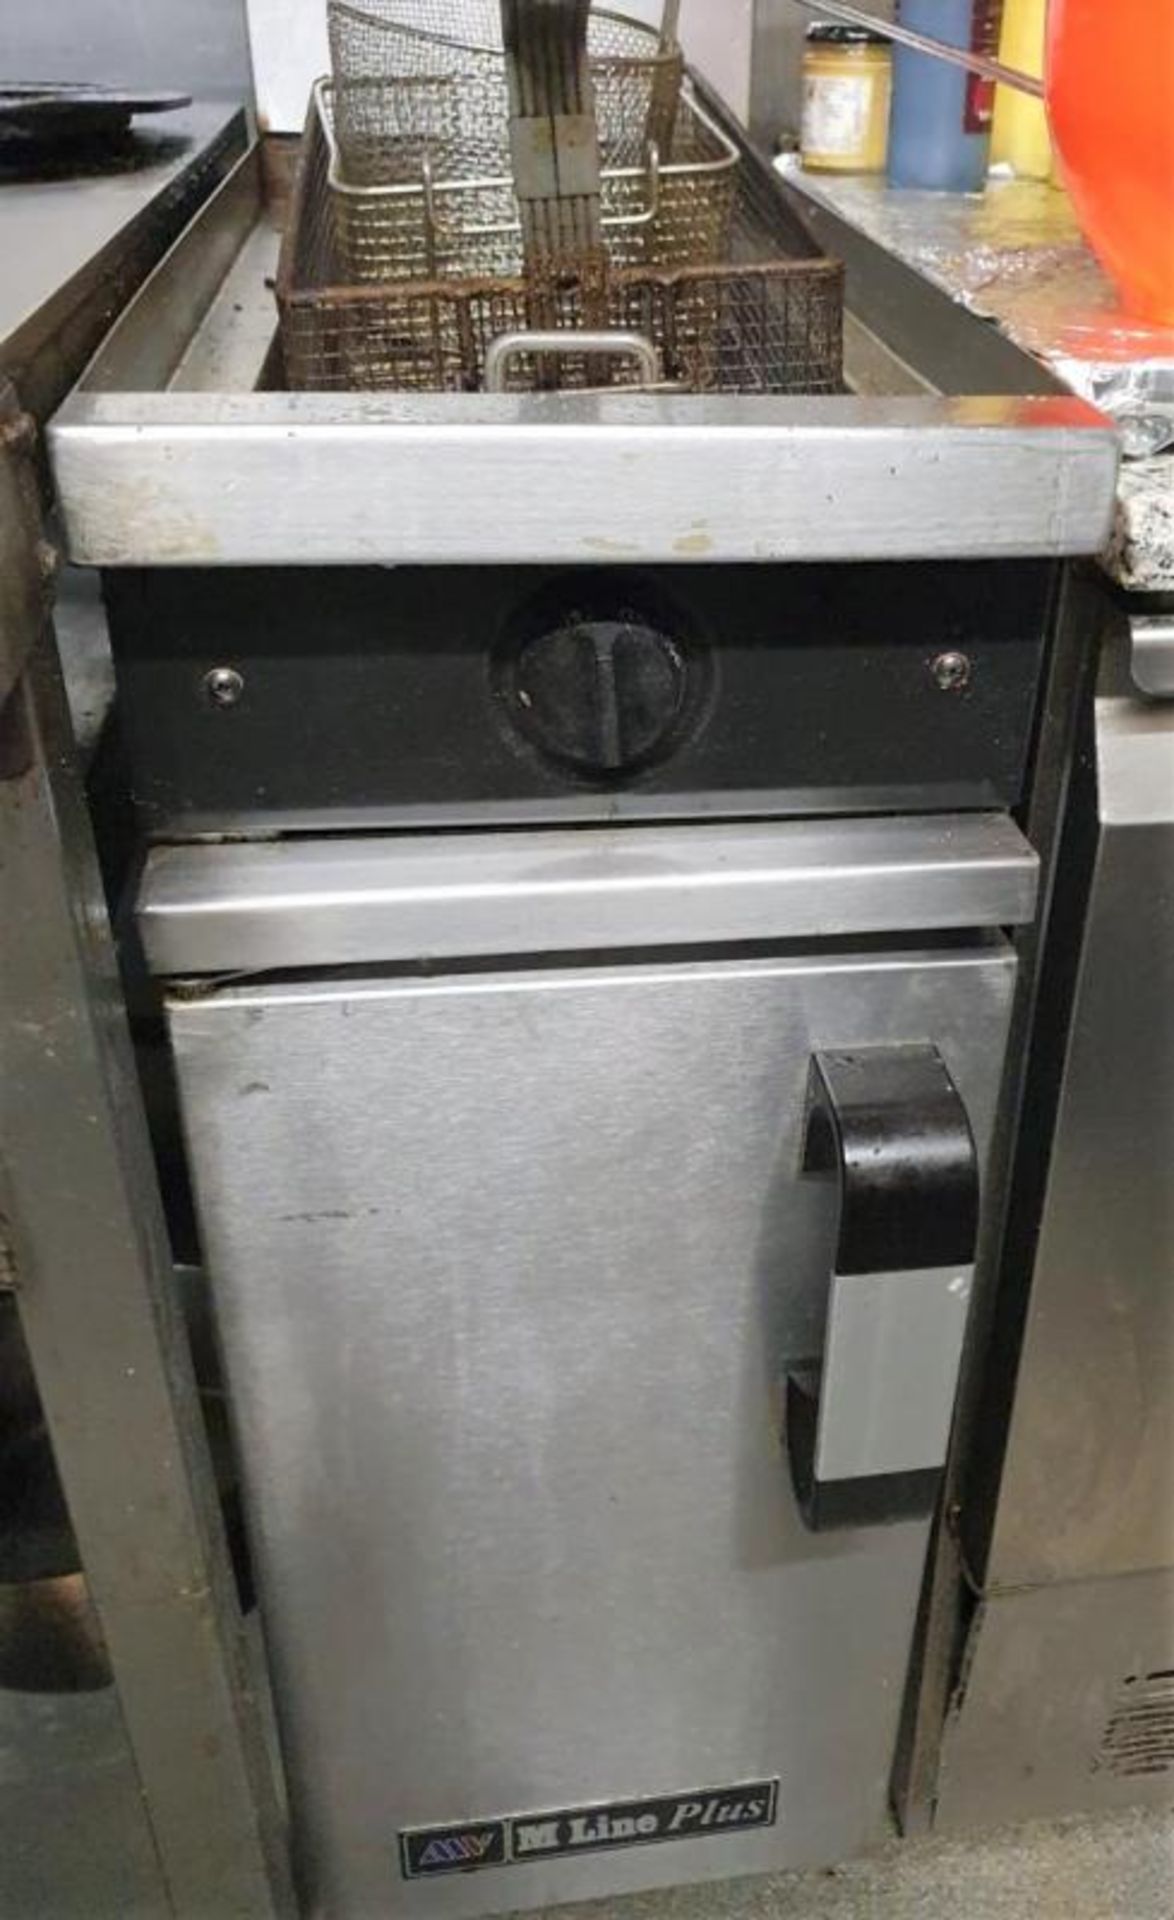 1 x M Line Plus Single Basket Gas Fryer - Stainless Steel Finish - CL514 - Approx Dimensions H118 x